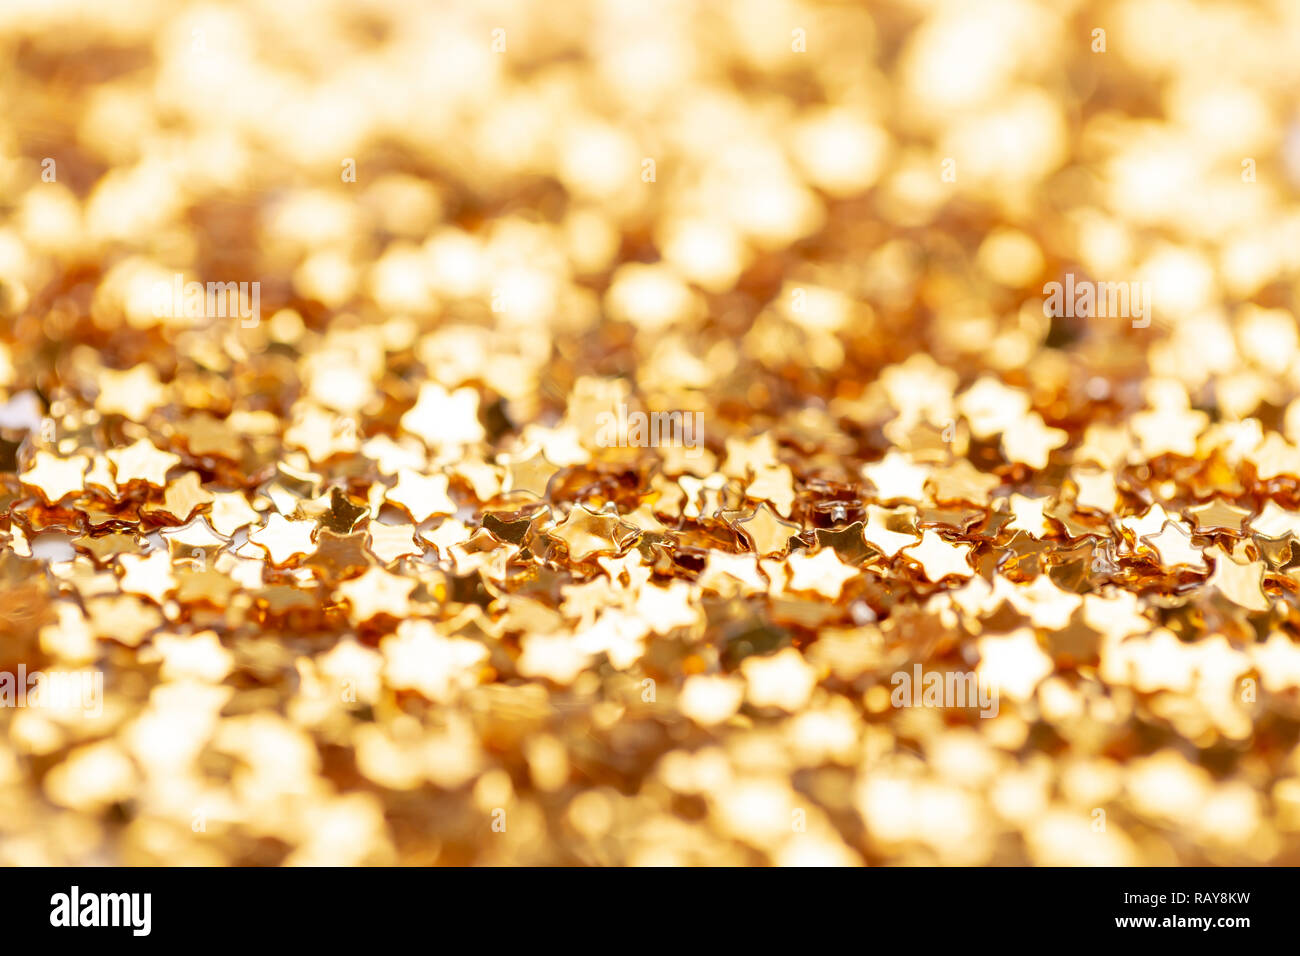 Wallpaper Of Shiny Twinkling And Sparkling Stars Stock Photo